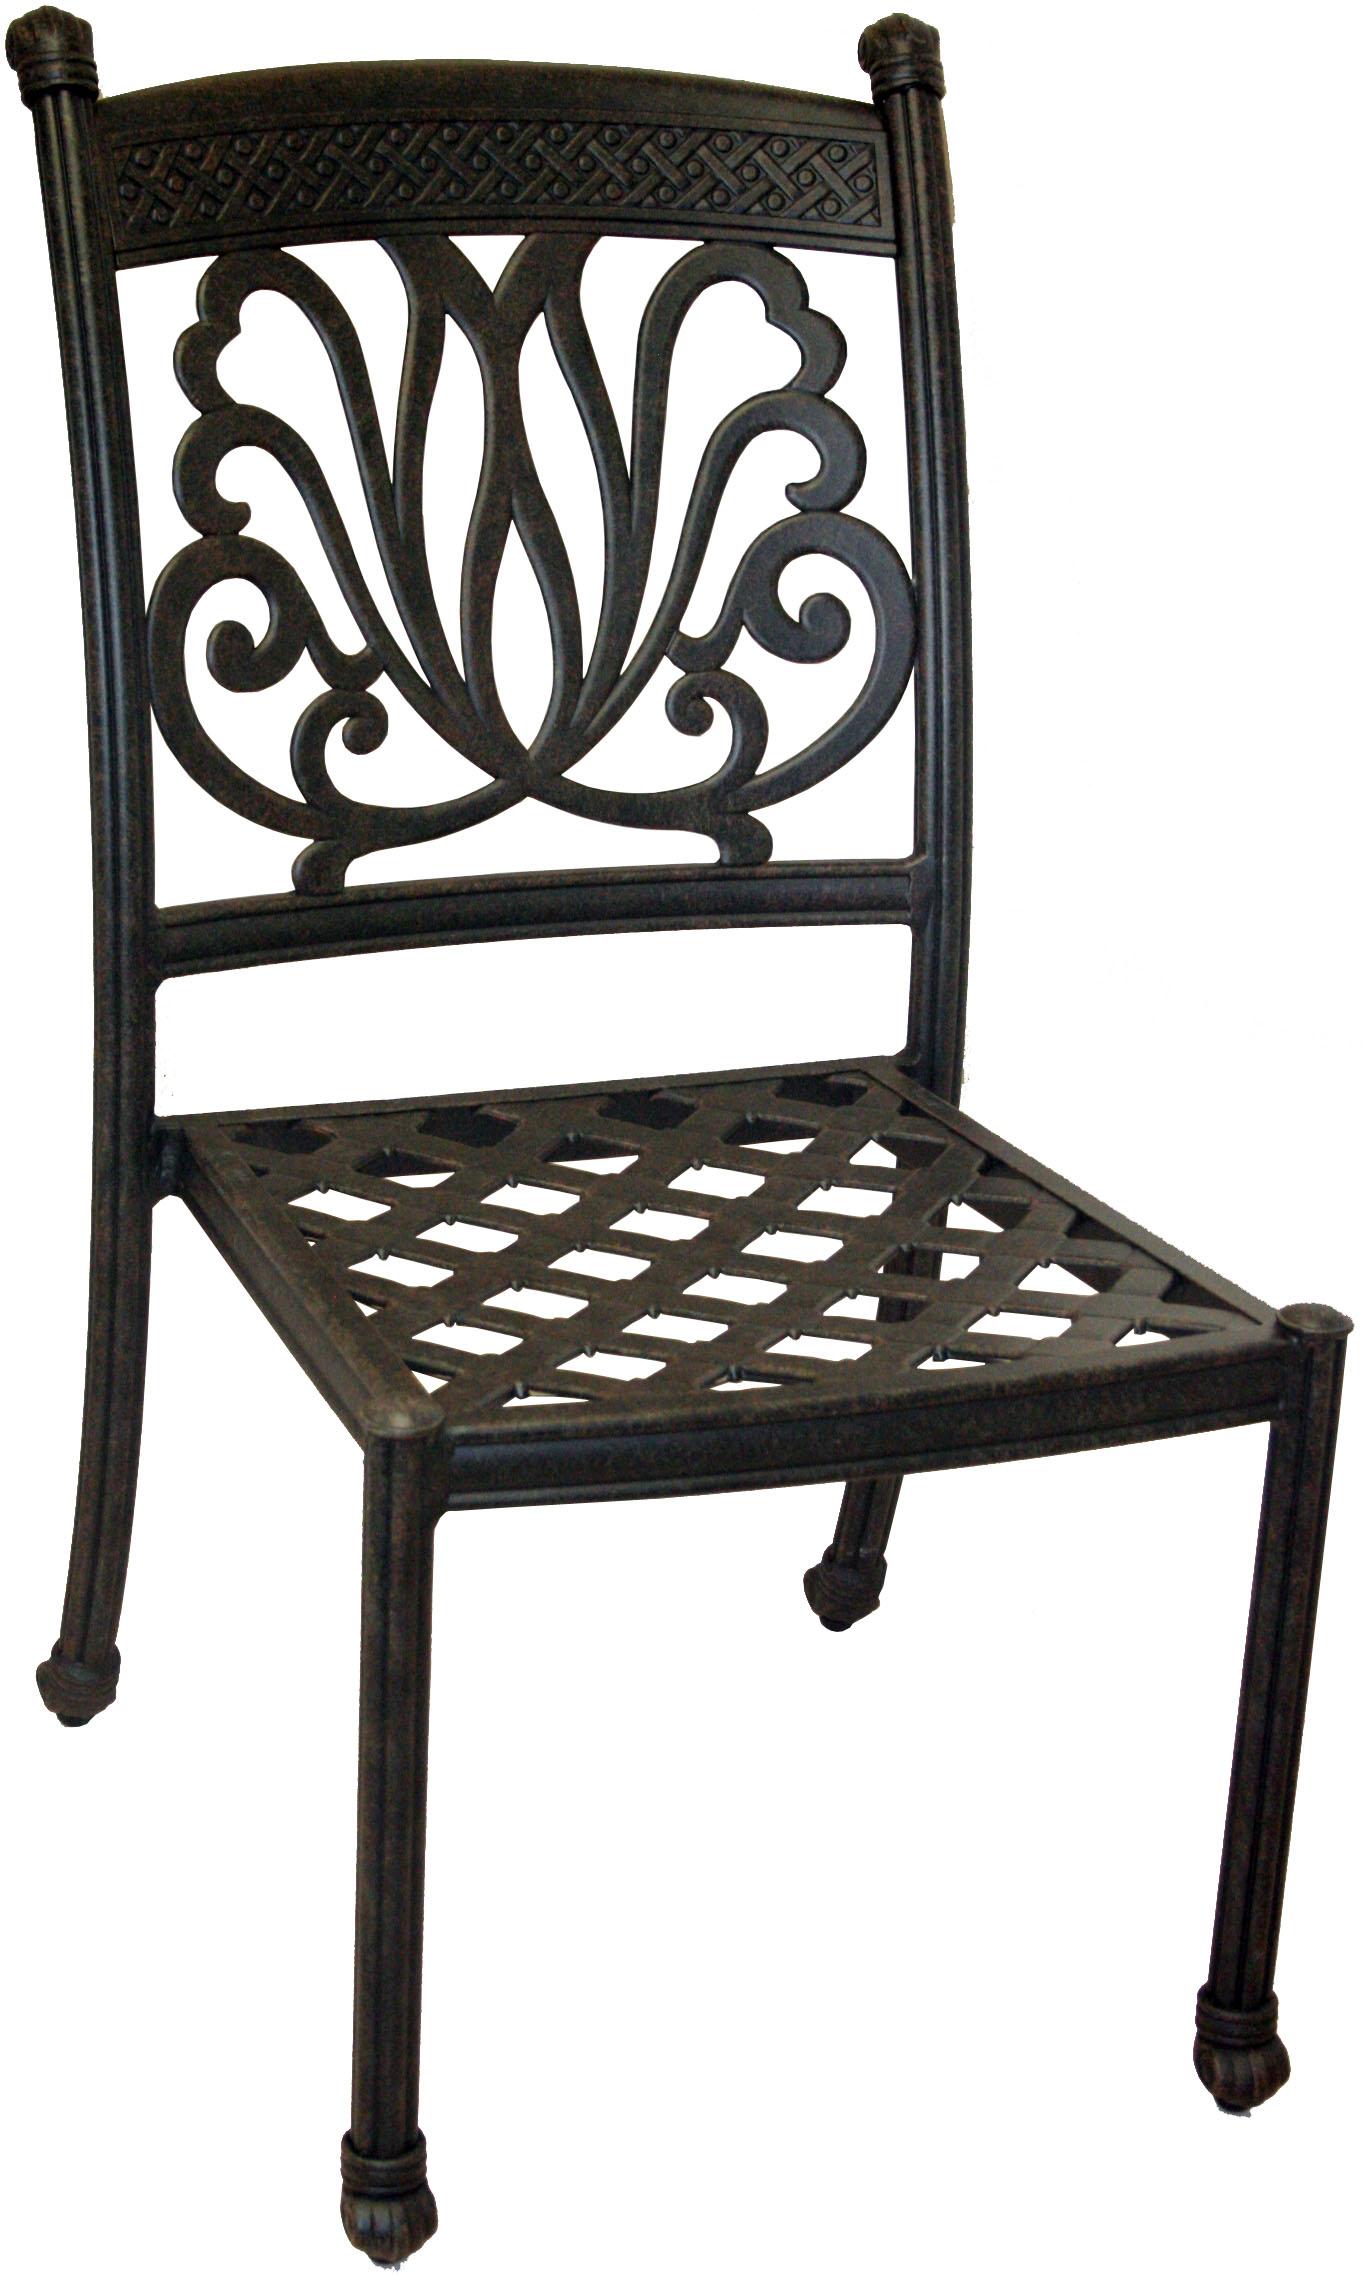 

    
Ariana Cast Aluminum Armless Dining Chair w/ Natural Sunbrella Cushion Set of 4 by CaliPatio SPECIAL ORDER
